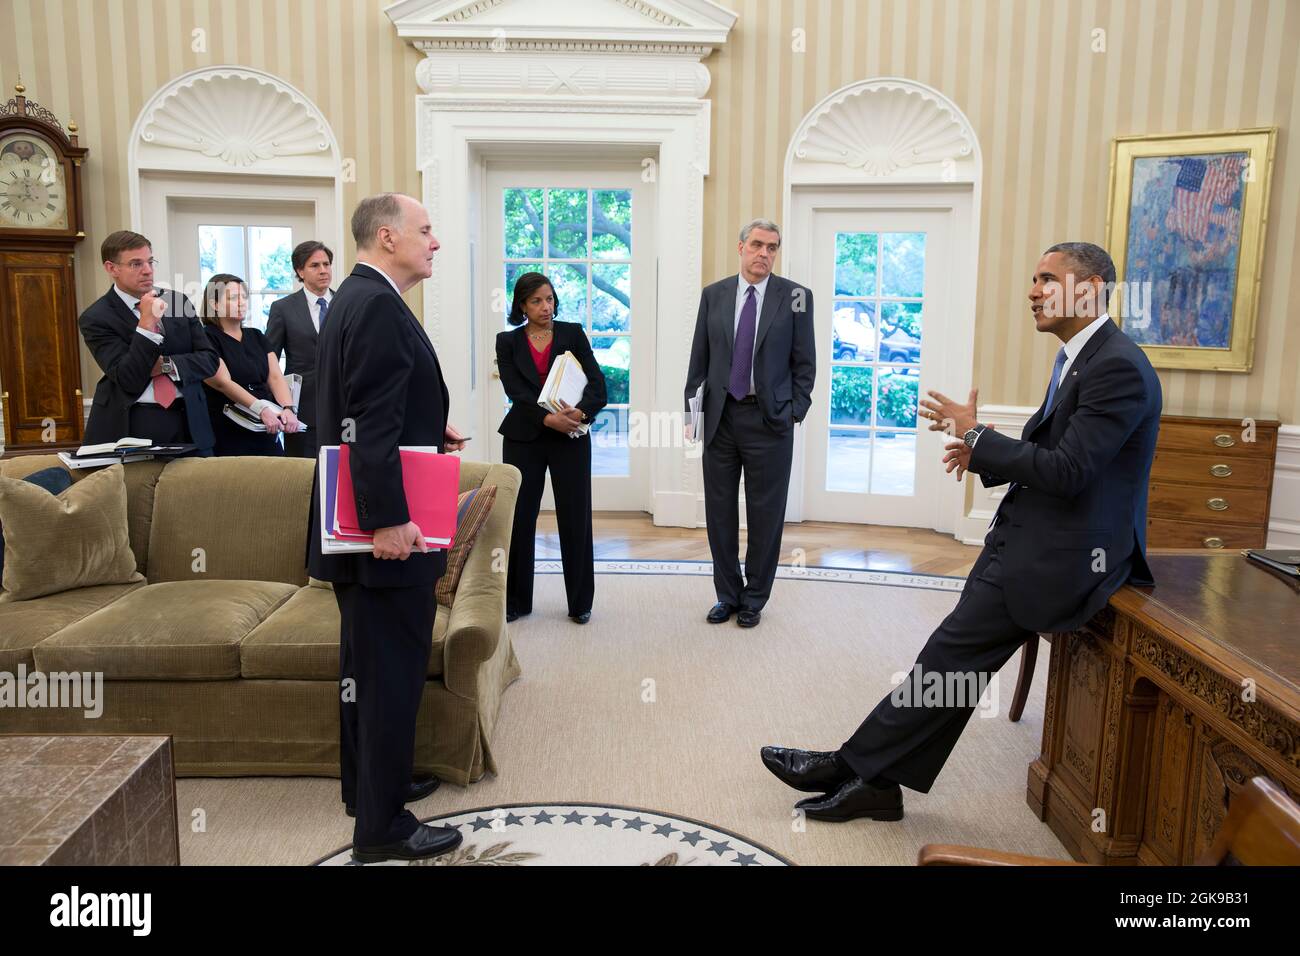 President Barack Obama talks with advisors in the Oval Office, June 25, 2013. Pictured, from left, are: Jeff Eggers, Senior Director for Afghanistan and Pakistan; Lisa Monaco, Assistant to the President for Homeland Security and Counterterrorism; Tony Blinken, Deputy National Security Advisor; National Security Advisor Tom Donilon; Amb. Susan Rice, the incoming National Security Advisor; and Doug Lute, Deputy Assistant to the President and Coordinator for South Asia. (Official White House Photo by Pete Souza)  This official White House photograph is being made available only for publication by Stock Photo